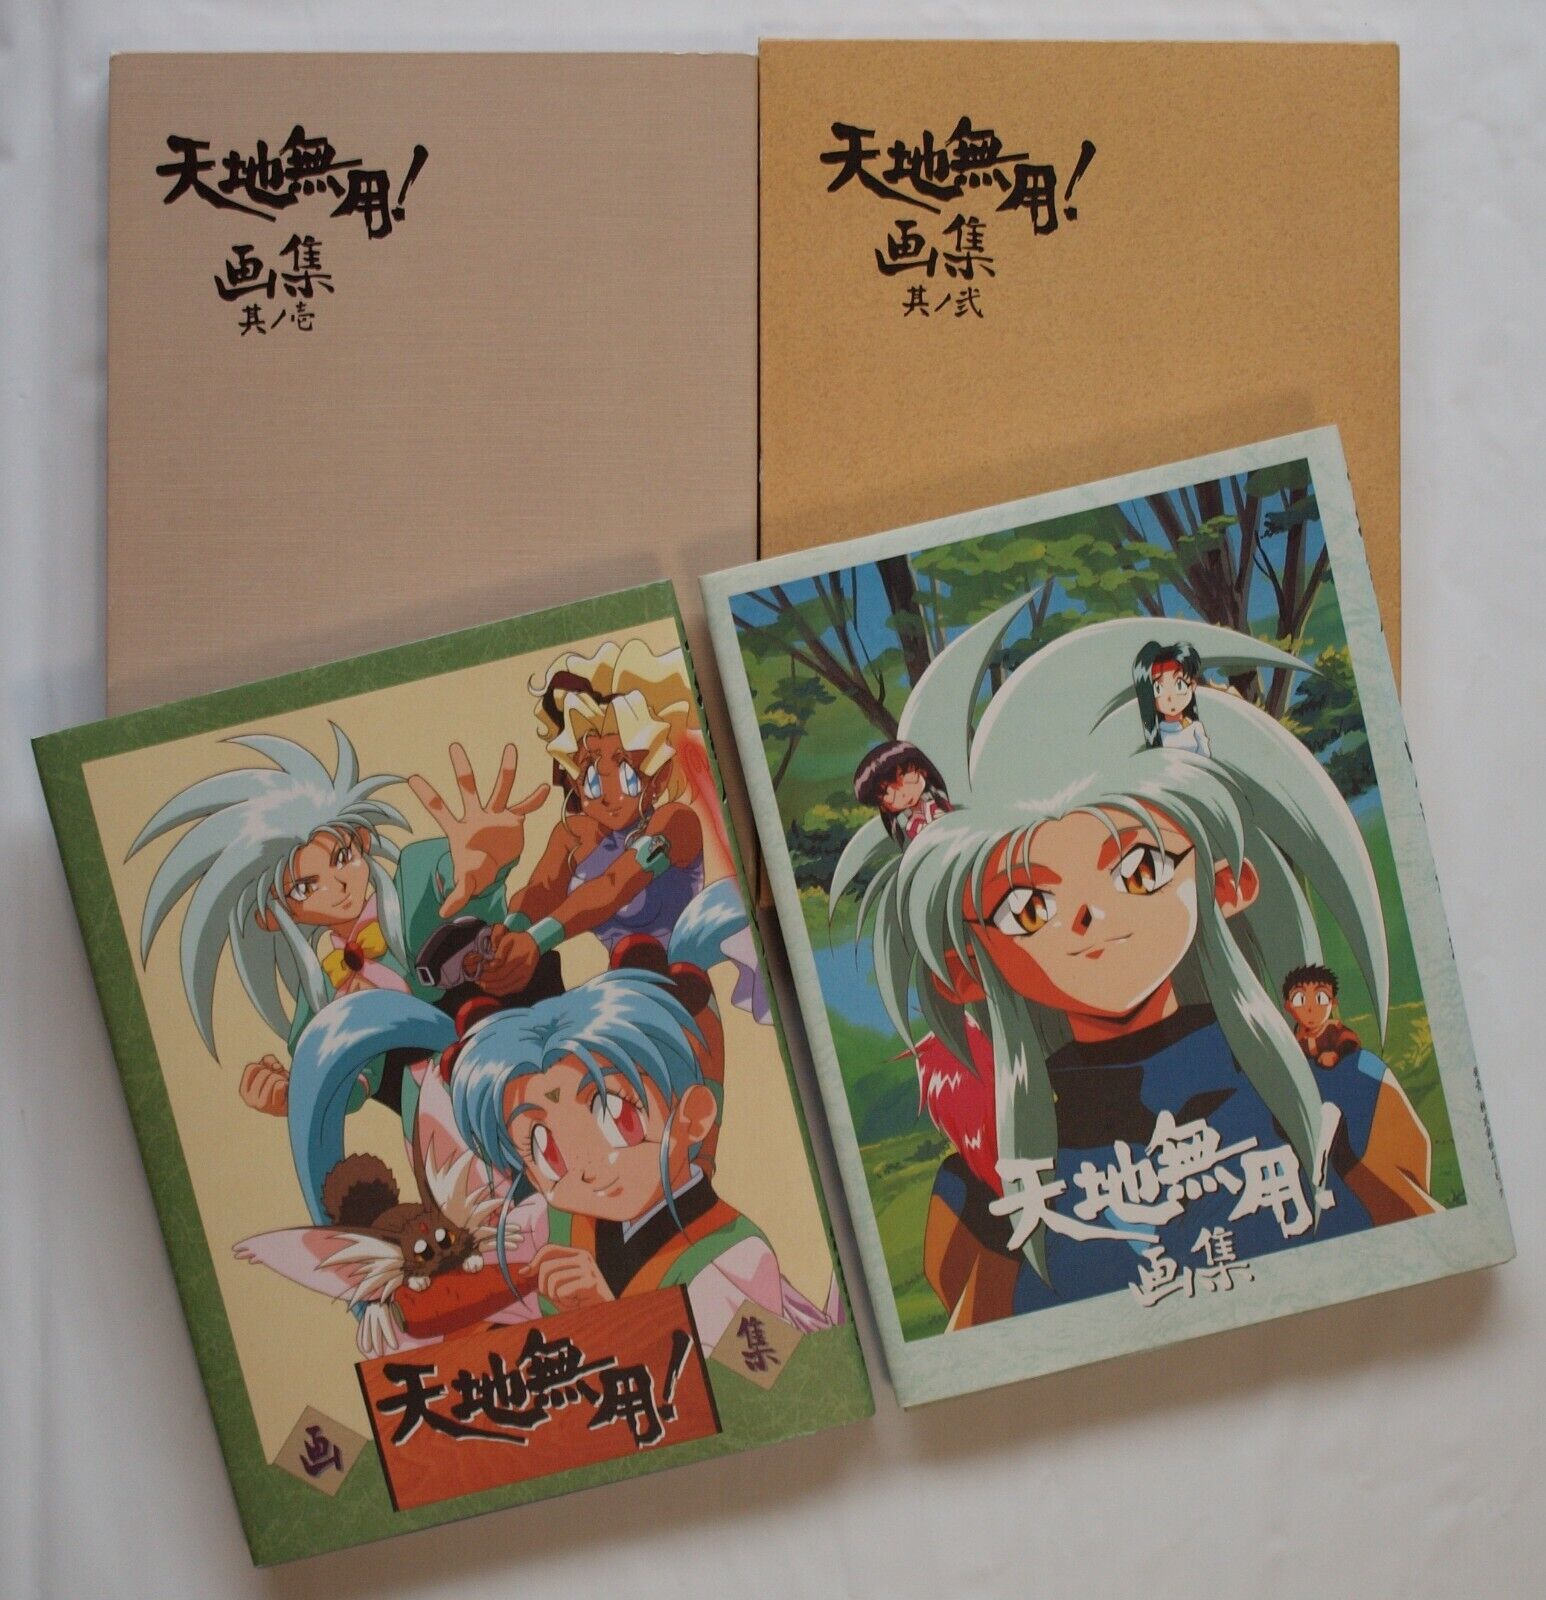 TENCHI MUYO  First edition Art book No.1 & No.2 set with poster Anime JAPAN